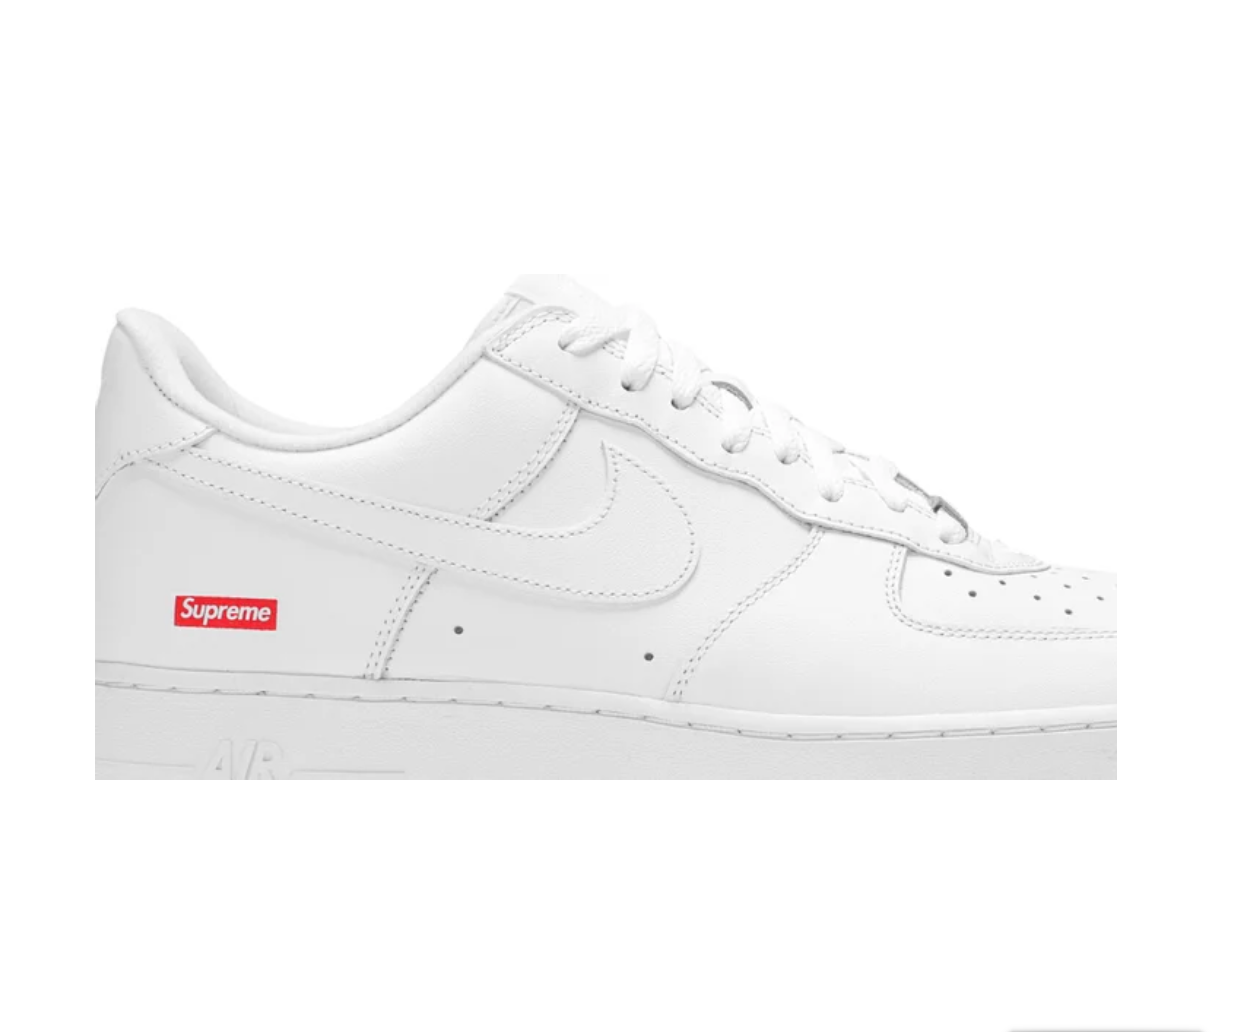 Classic White Supreme X Air Force 1 Low 'Box Logo’ Lacrosse Shoes  - Front with Little Zoom 